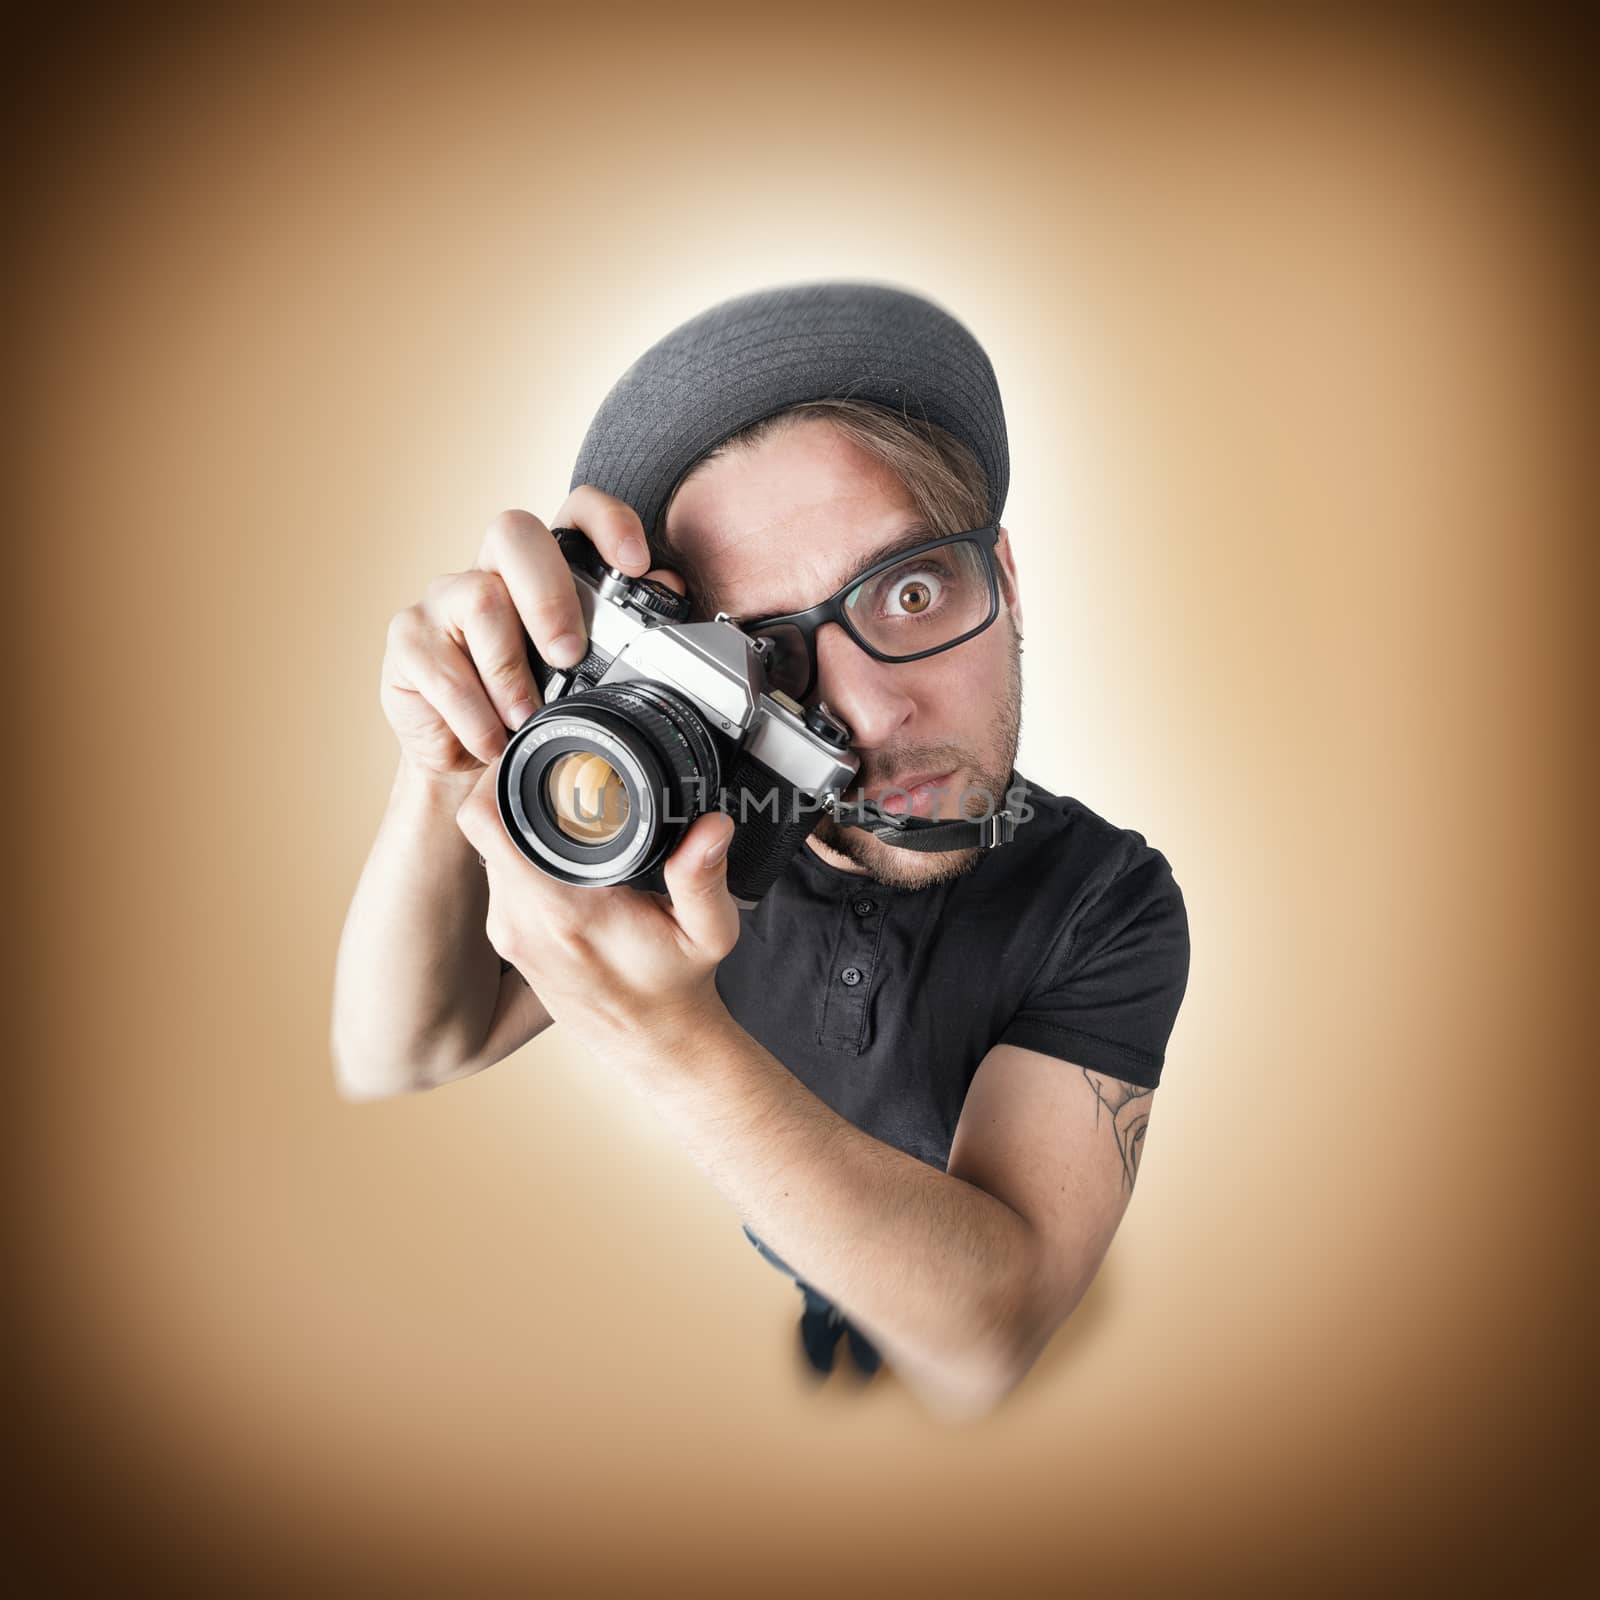 Funny man with a funny surprise expression shooting with his vintage reflex photo camera 